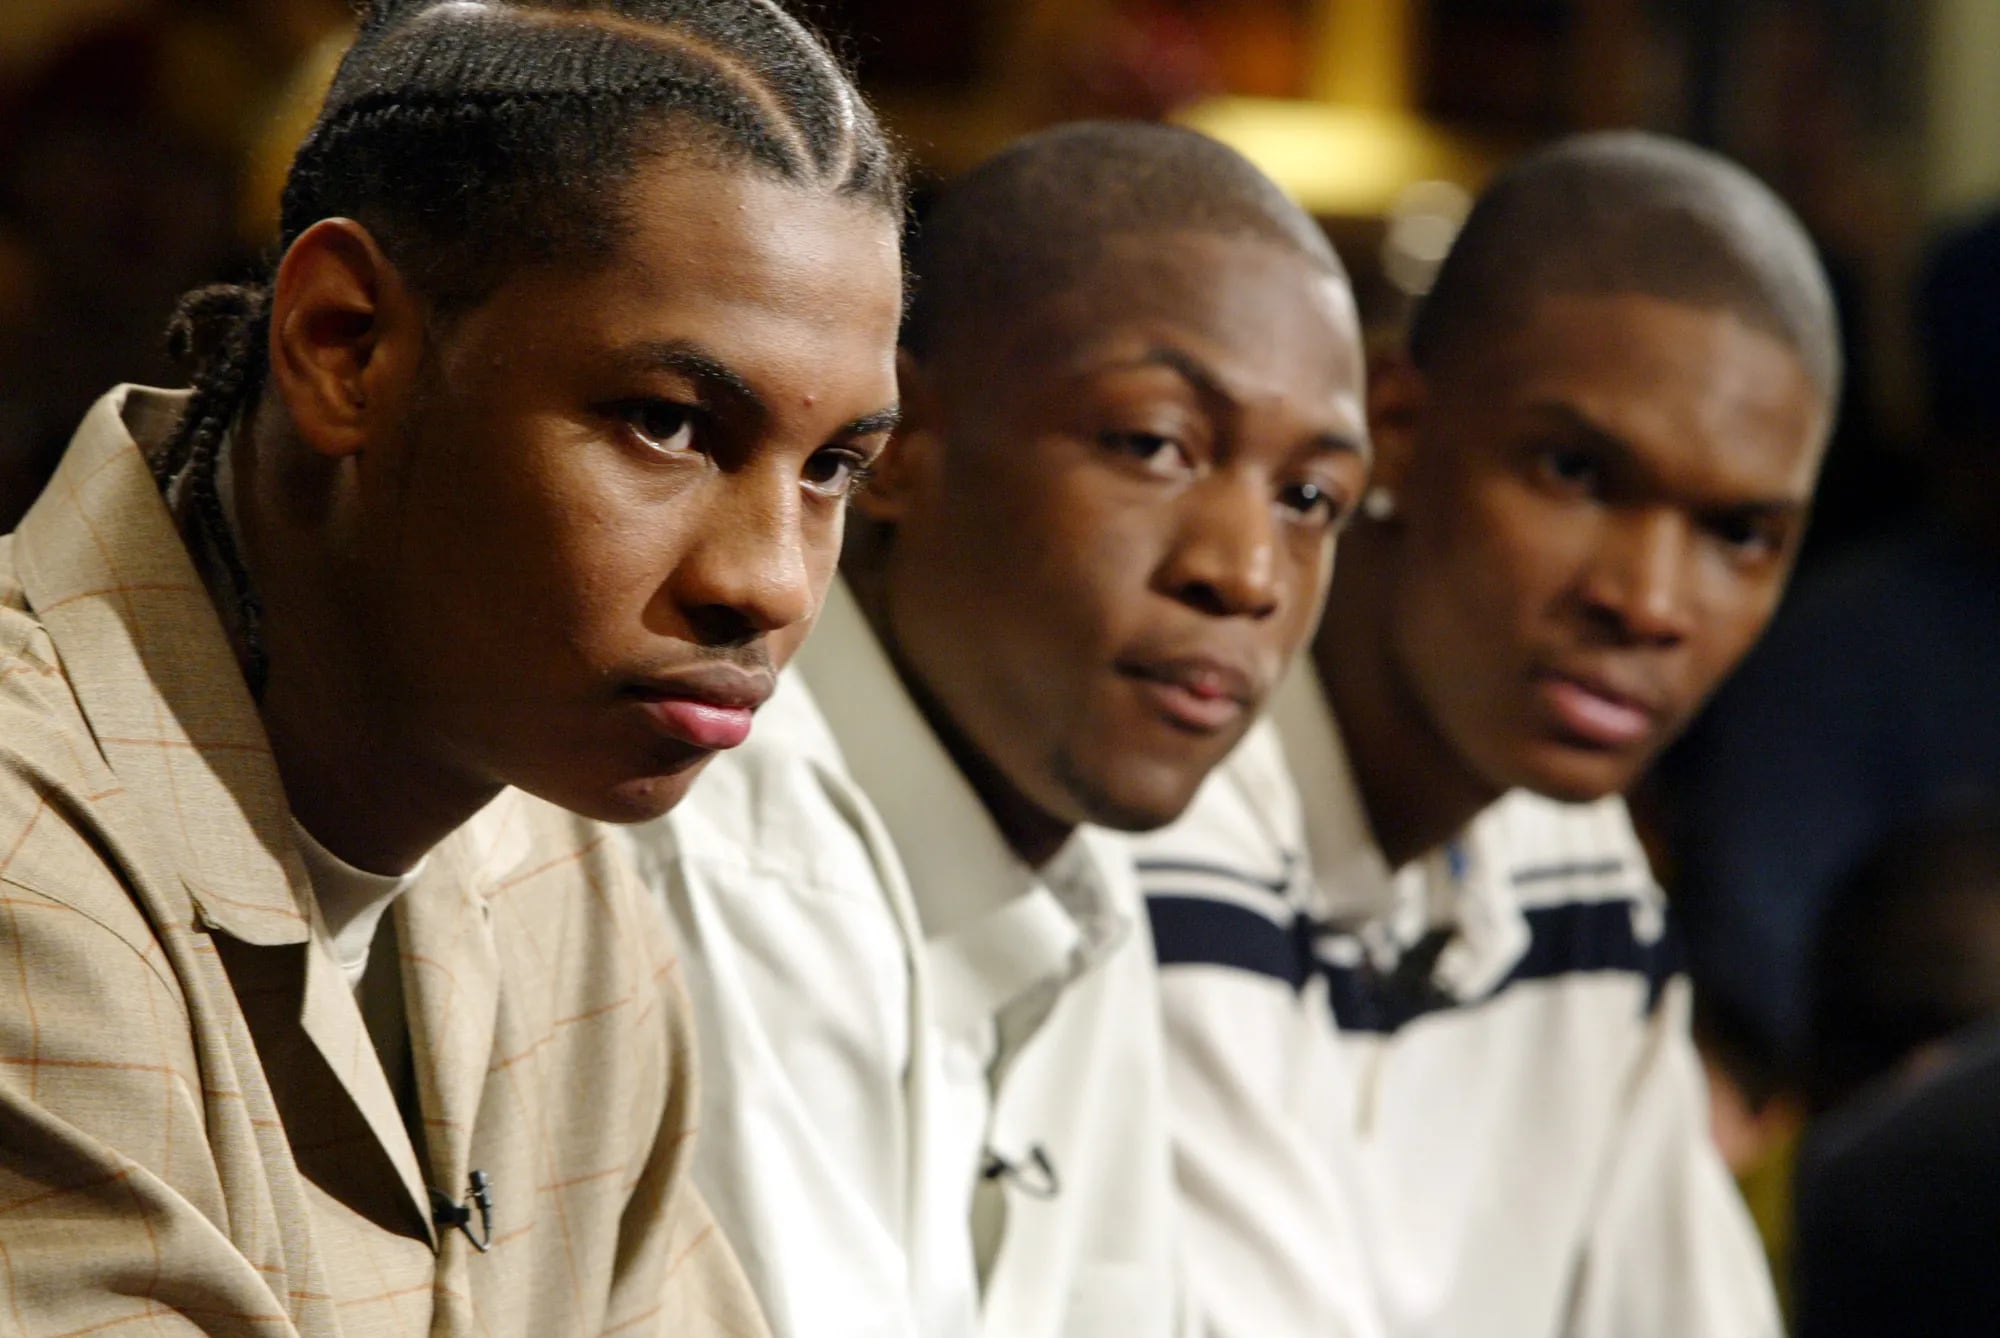 A look back at the most memorable NBA draft outfits of all time